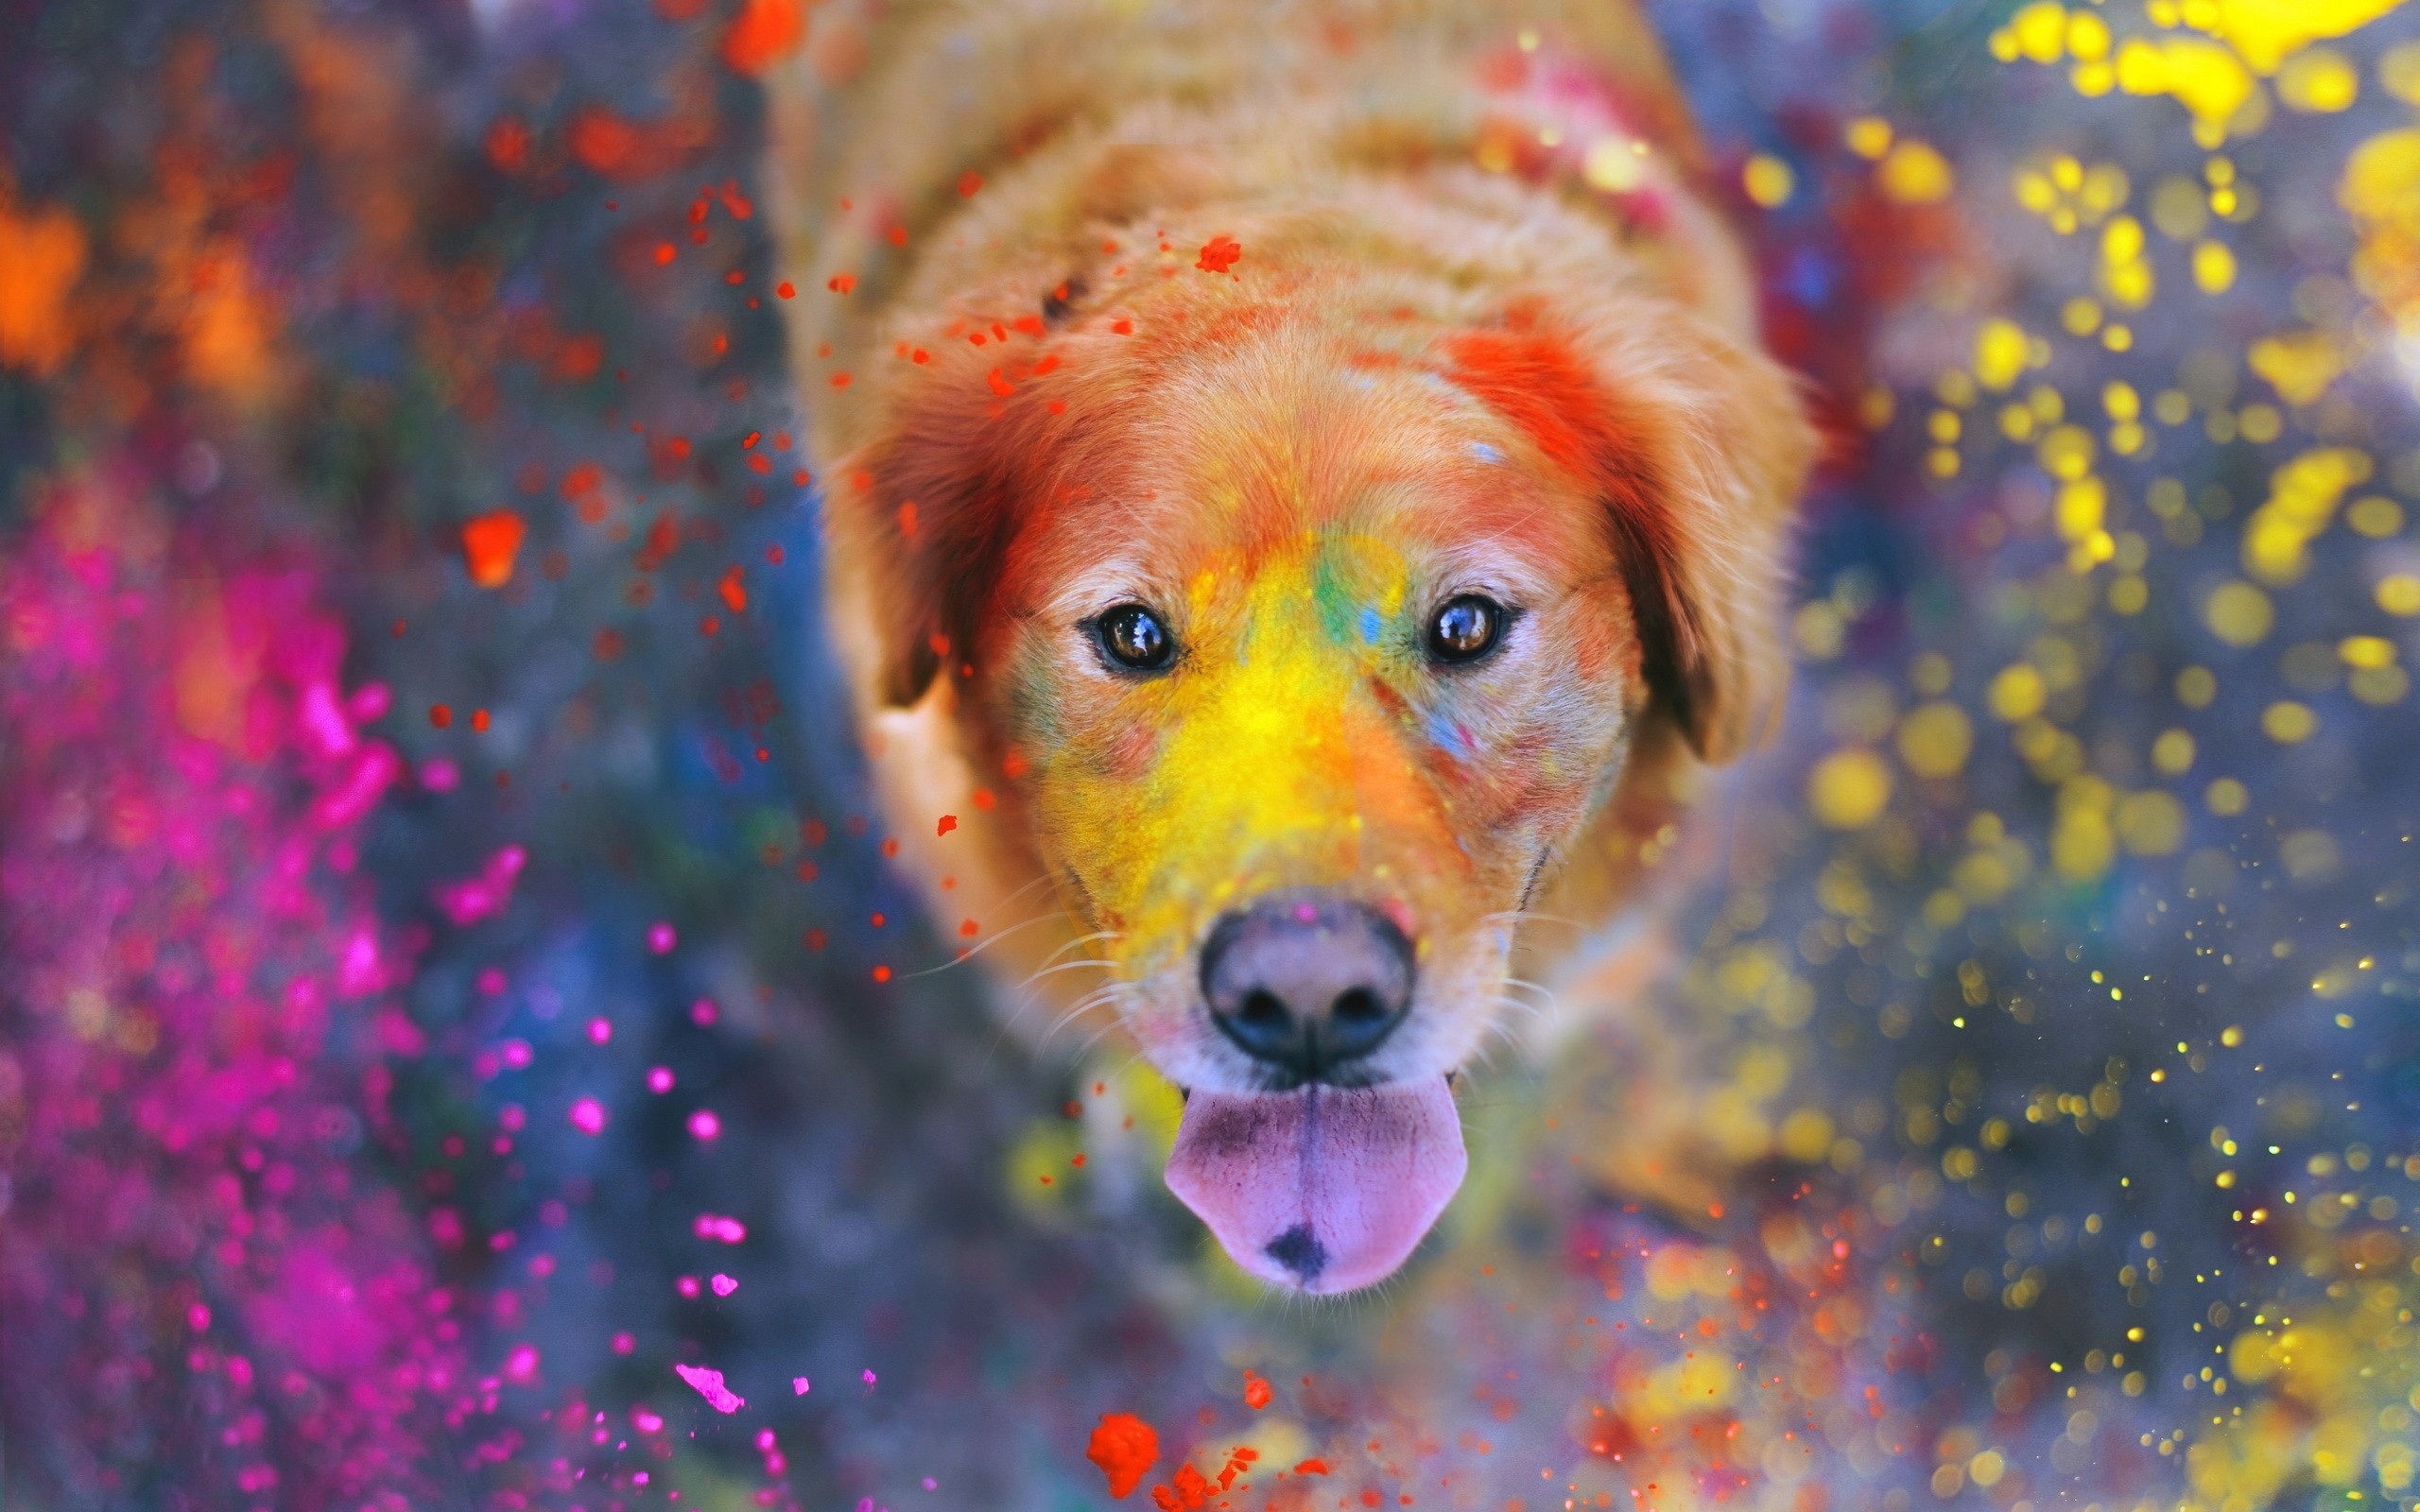 General 2560x1600 animals colorful paint paint splatter dog Labrador Retriever vibrant pink yellow looking at viewer mammals